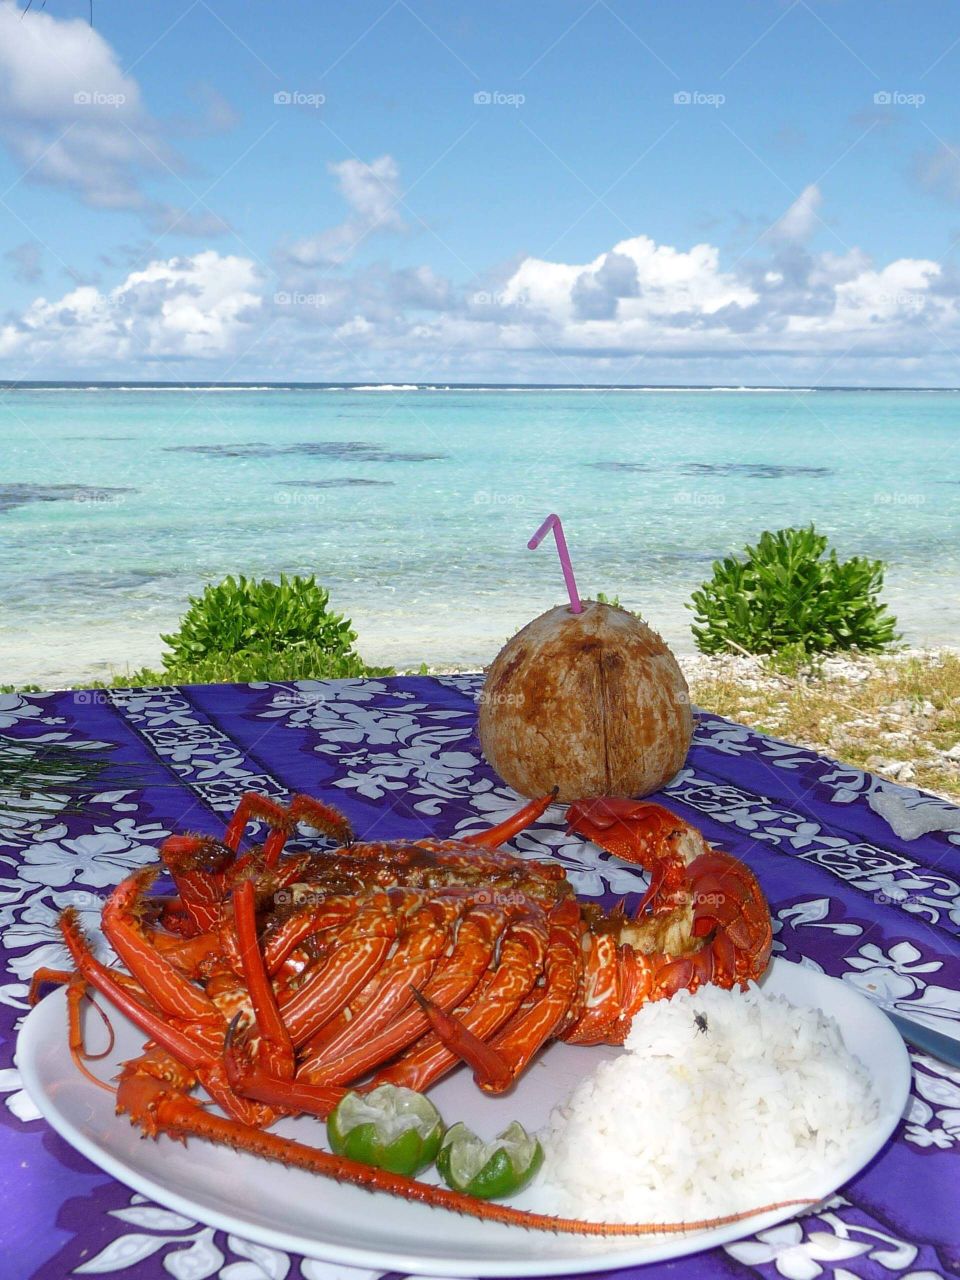 Crayfish and coconut, perfect lunch - Huahine, French polynesia